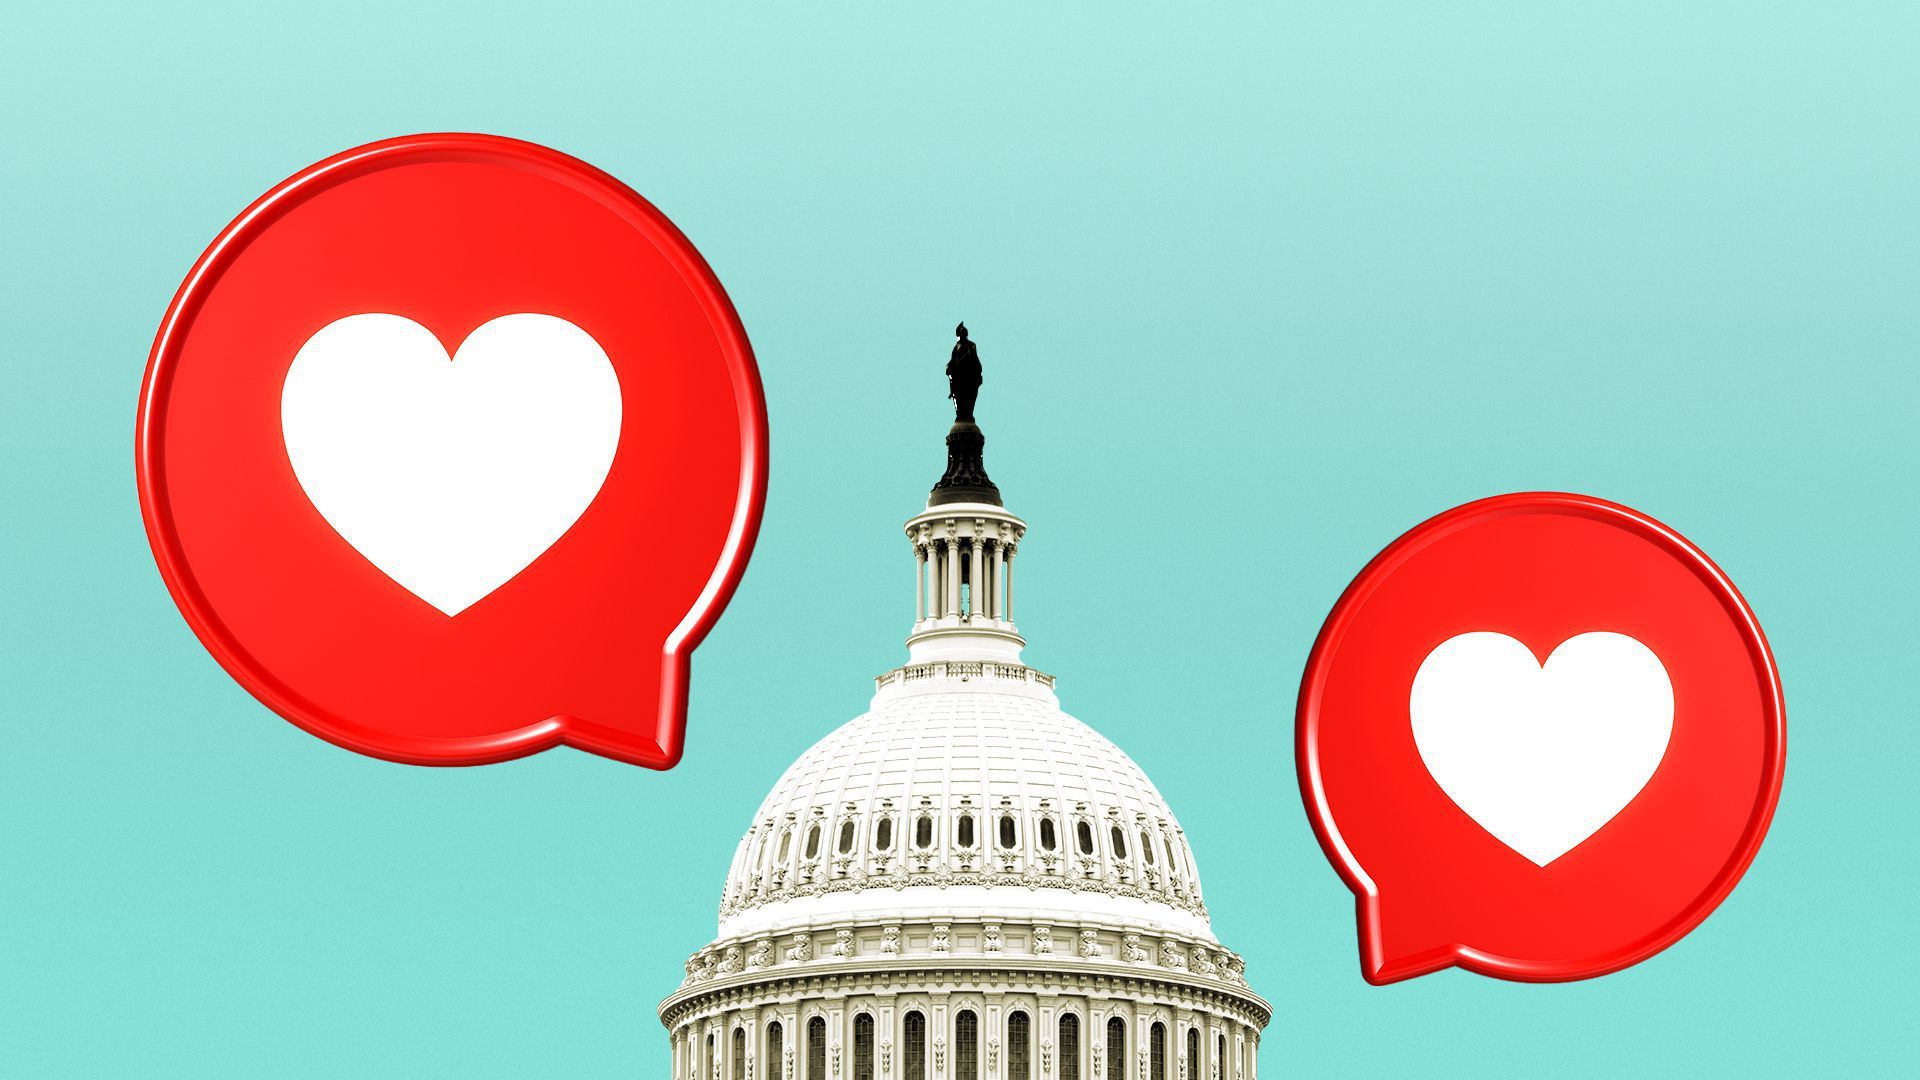 In illustration depicts a heart emoji against the background of the Capitol Dome.